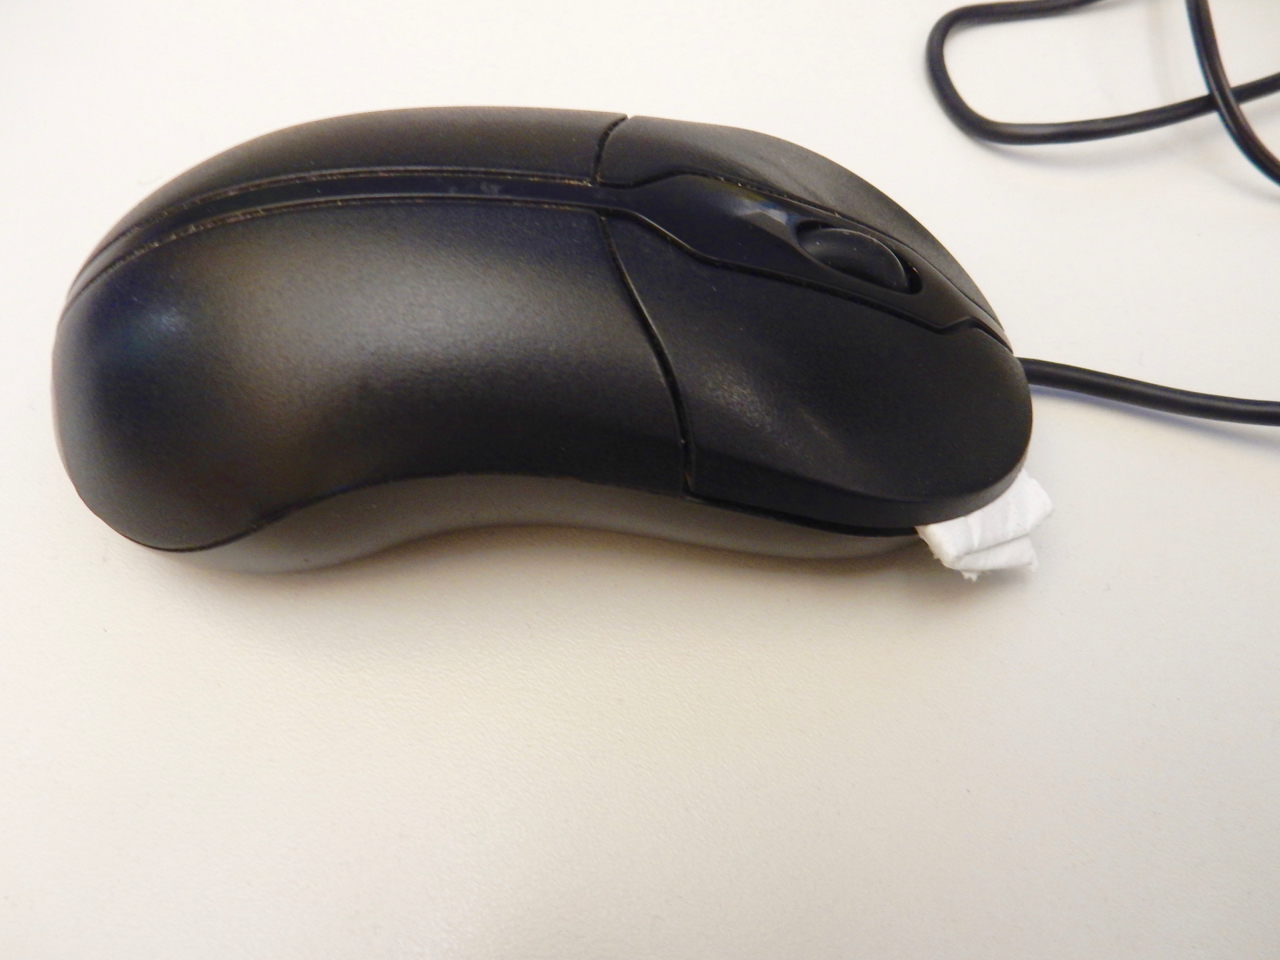 two-button mouse with folder paper towel under one button to disable it